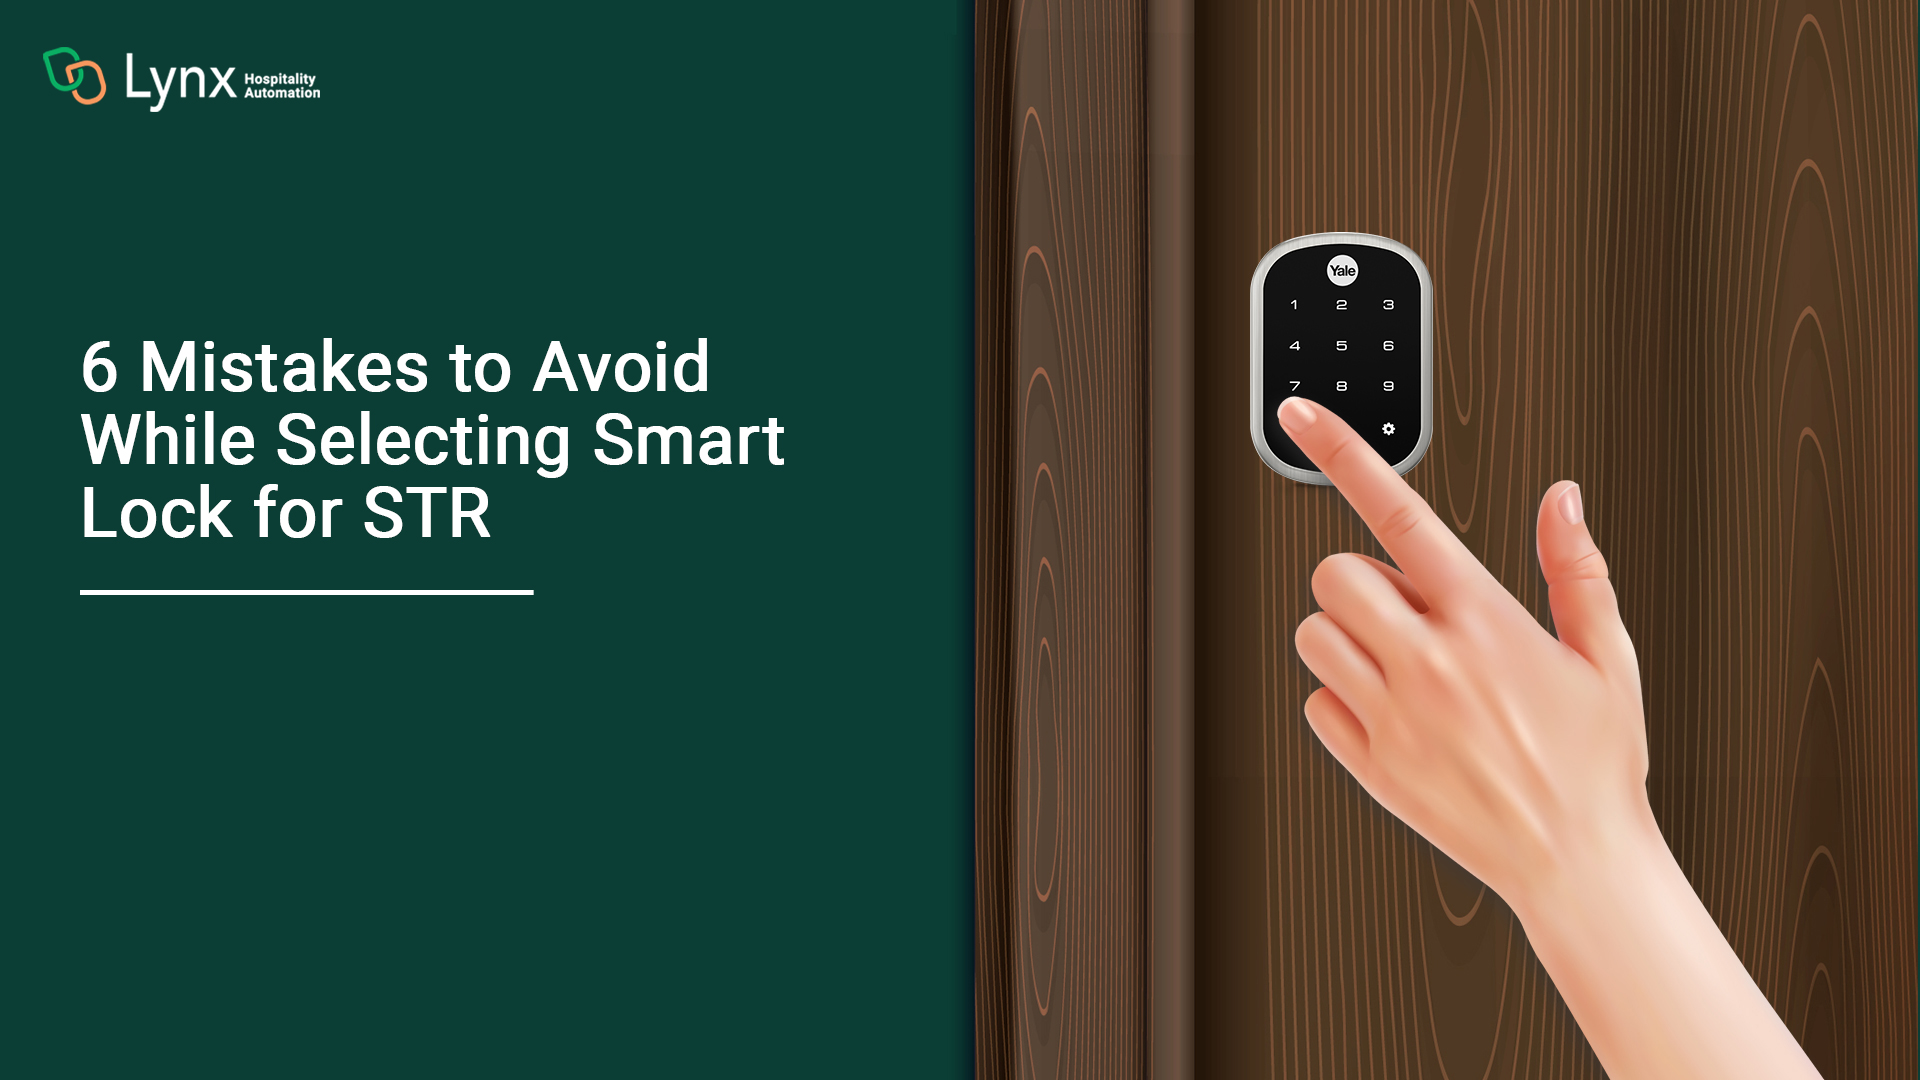 6-Mistakes-to-avoid-while-selecting-the-smart-lock-for-STR